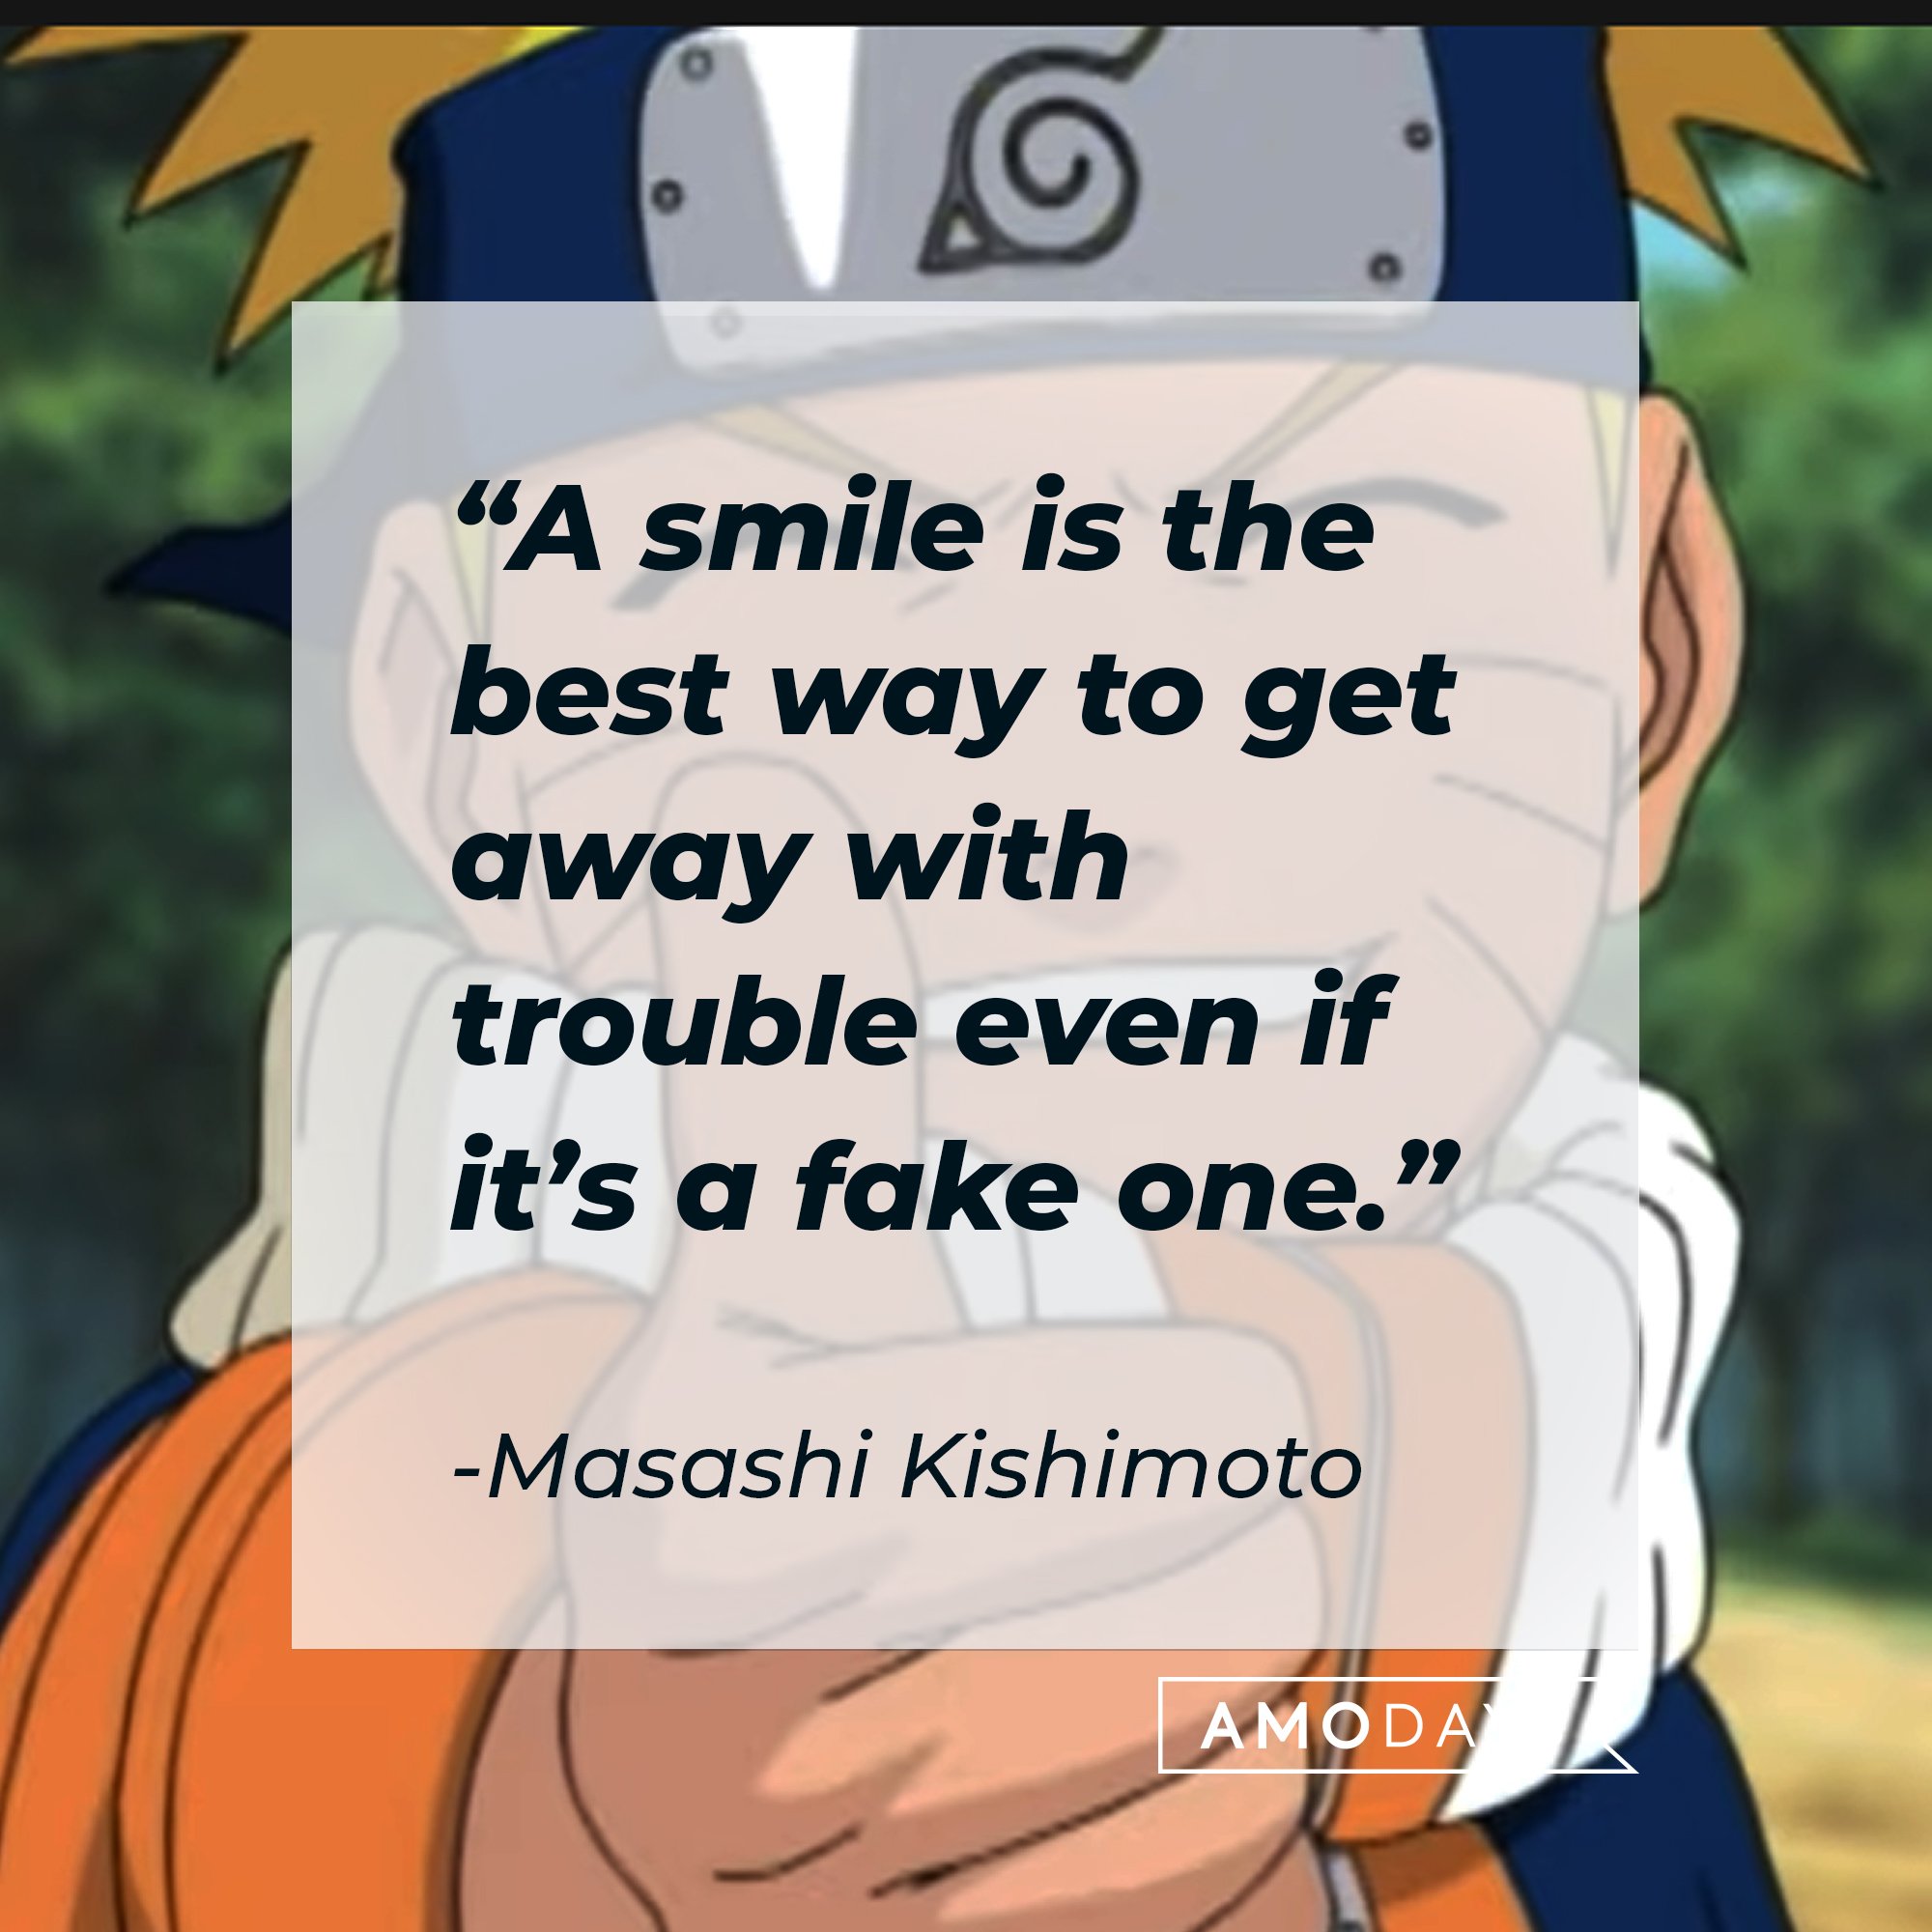 Masashi Kishimoto's quote: “A smile is the best way to get away with trouble, even if it’s a fake one.” | Image: AmoDays